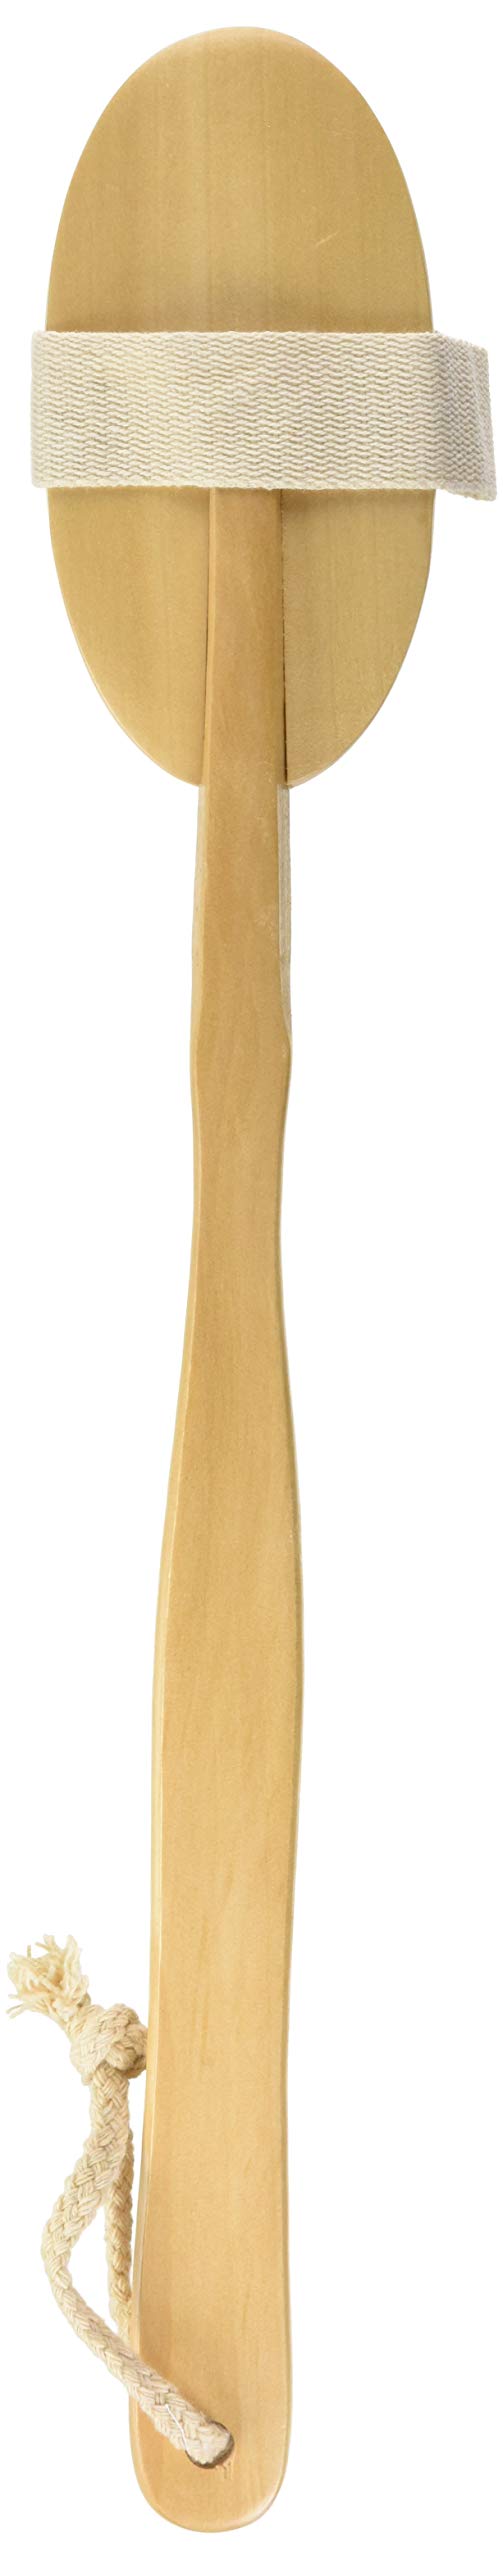 Wholesome Beauty Dry Skin Body Brush with Removable 11-Inch Wood Handle